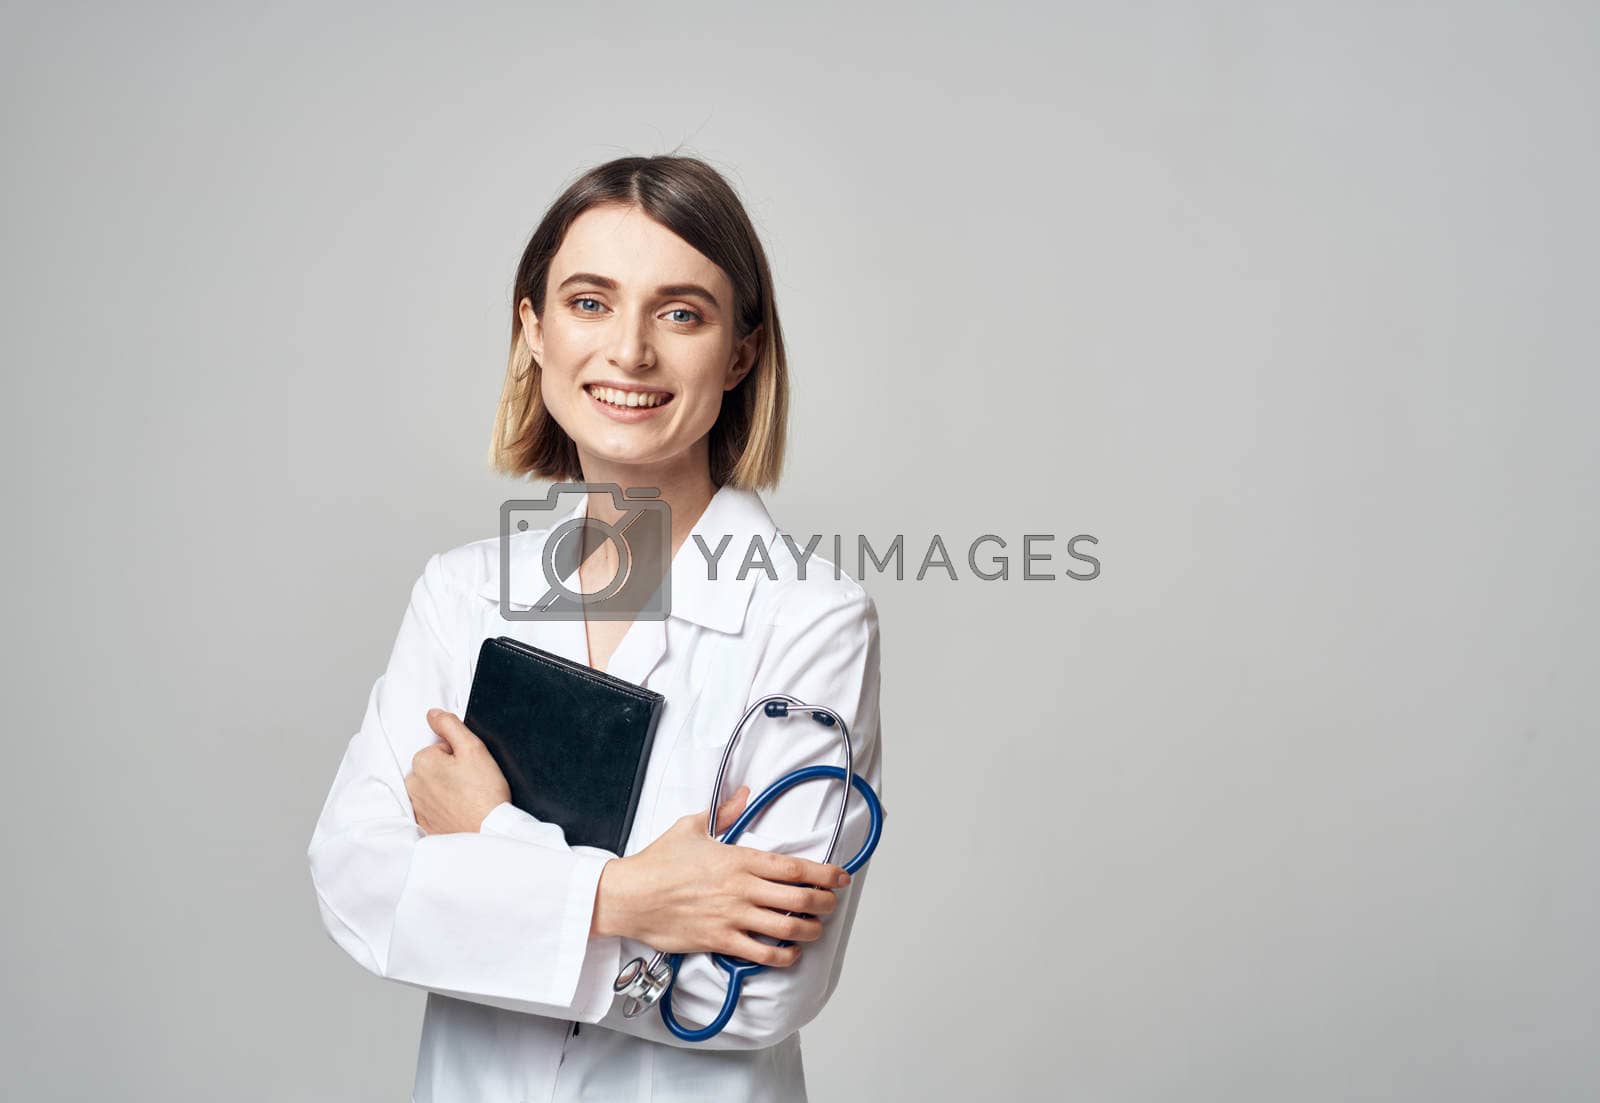 Royalty free image of woman doctor with stethoscope and medical gown documents in hands by SHOTPRIME